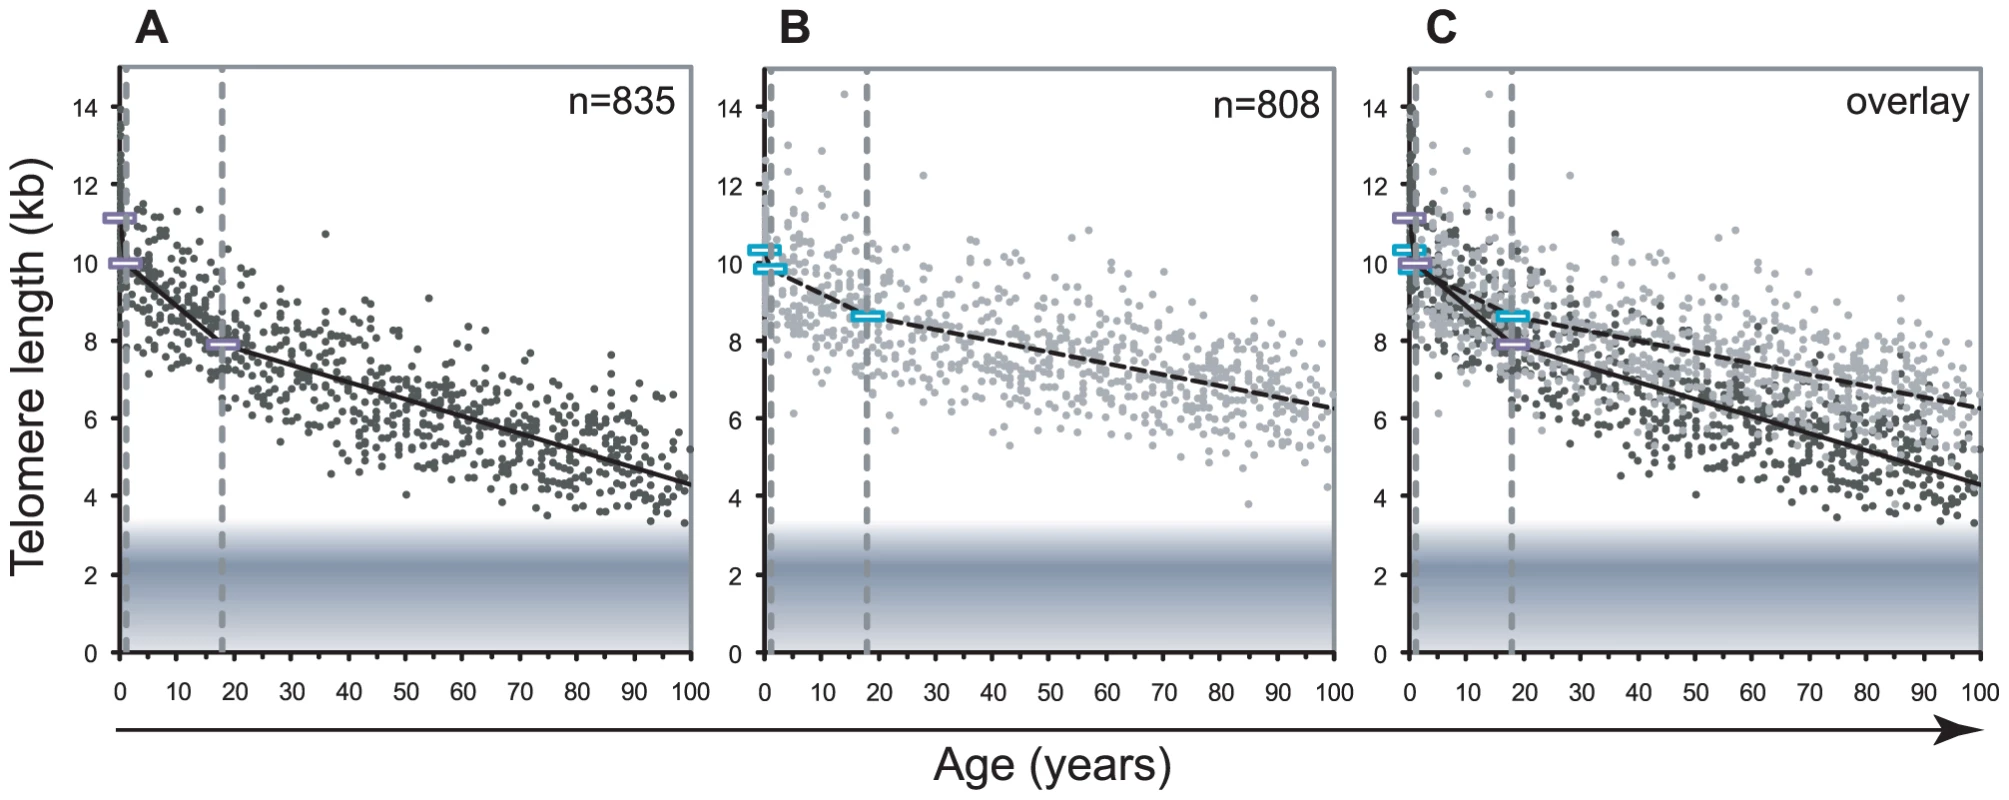 Decline in telomere length with age differs between lymphocytes and granulocytes.